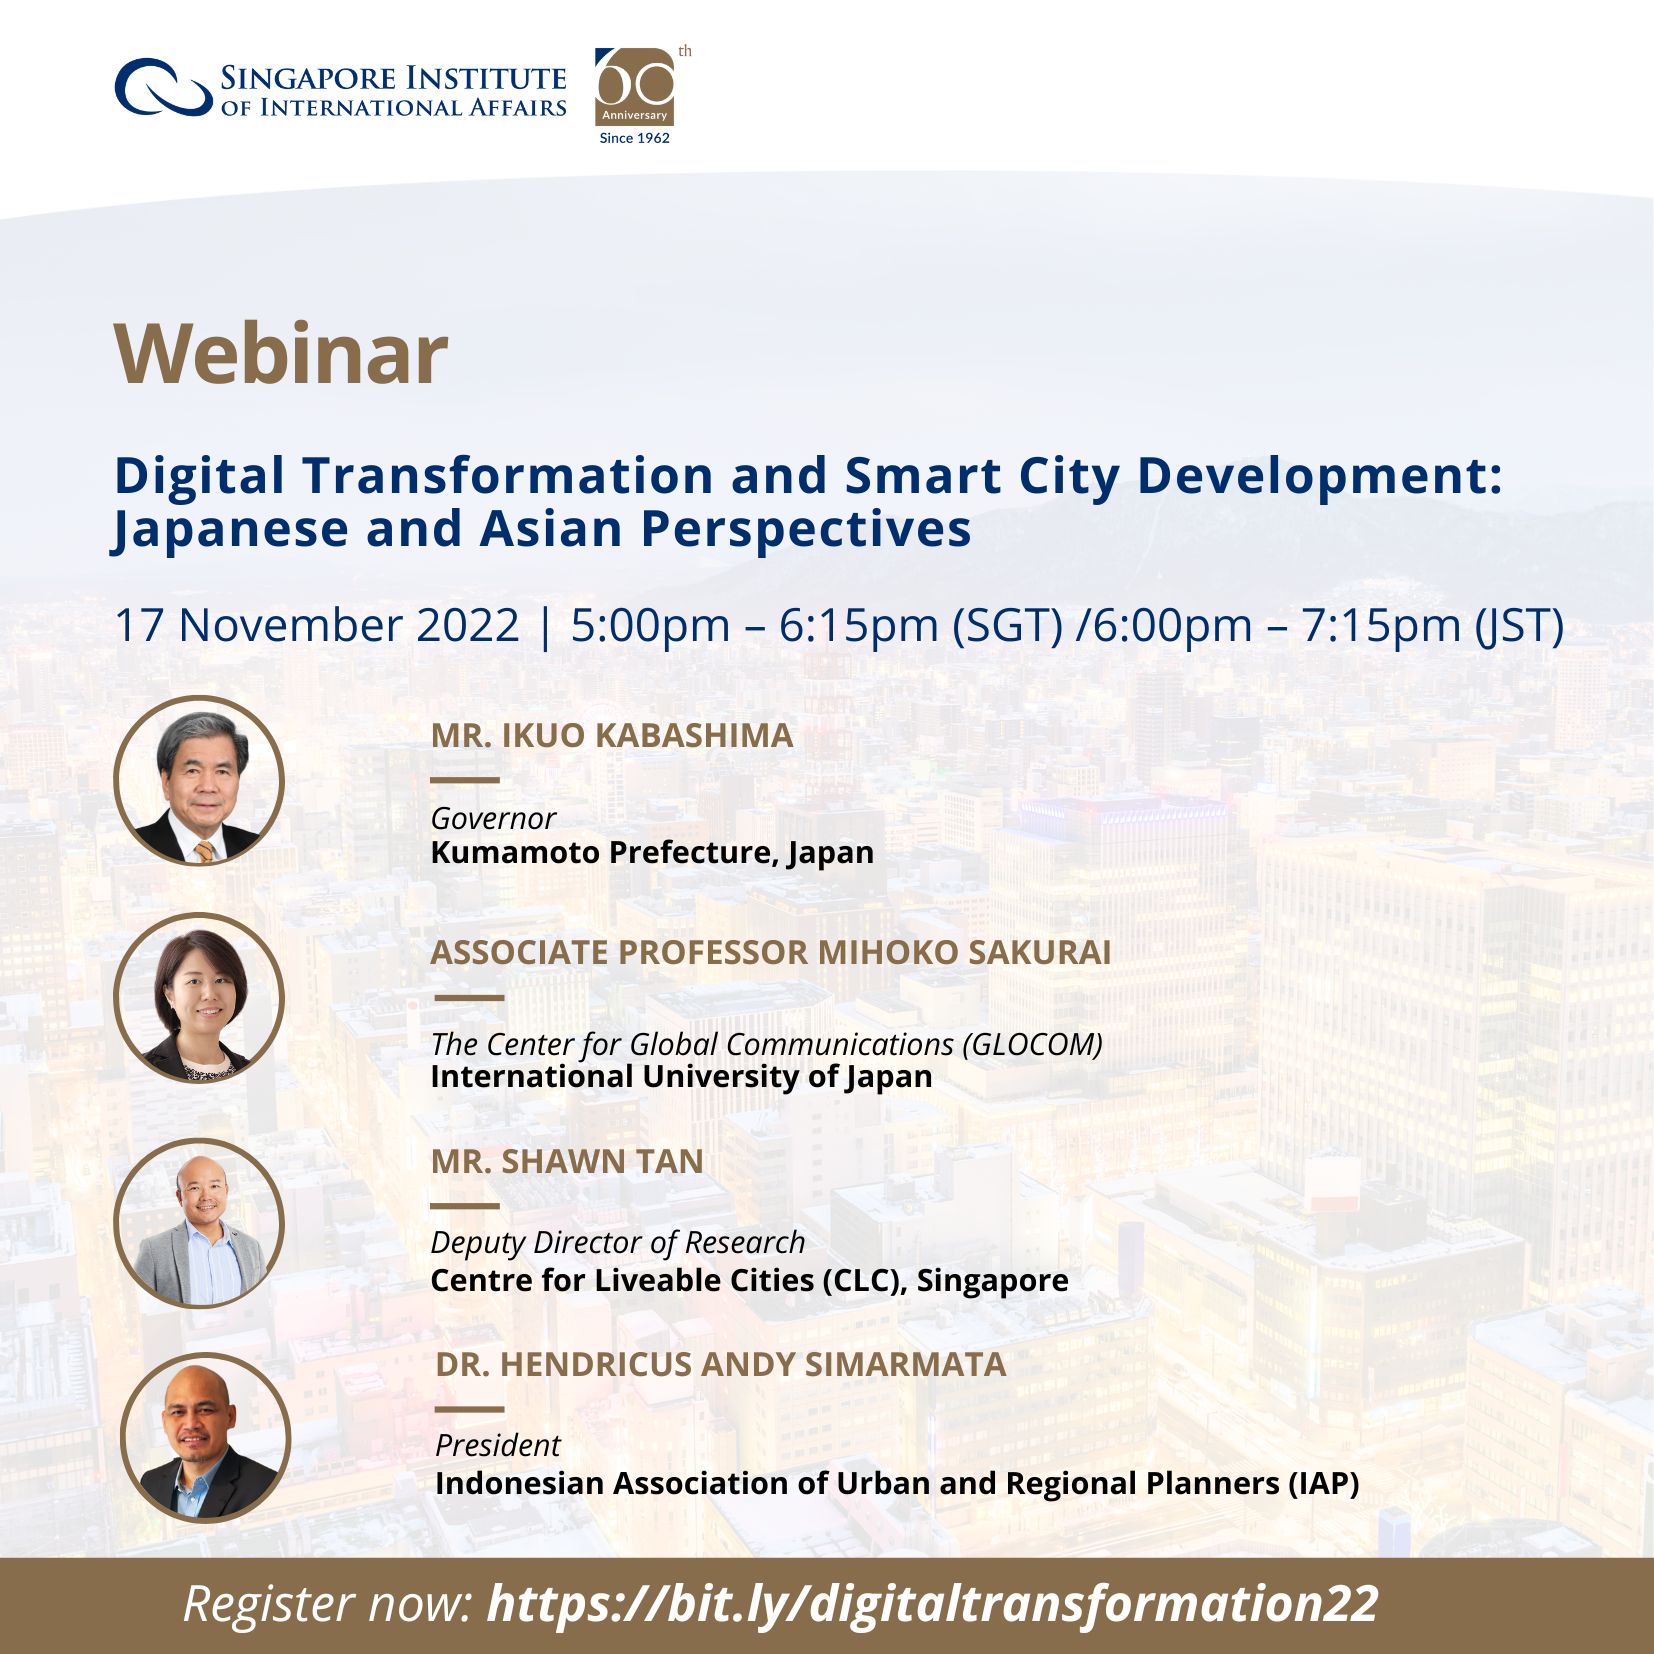 Digital Transformation and Smart City Development: Japanese and Asian Perspectives